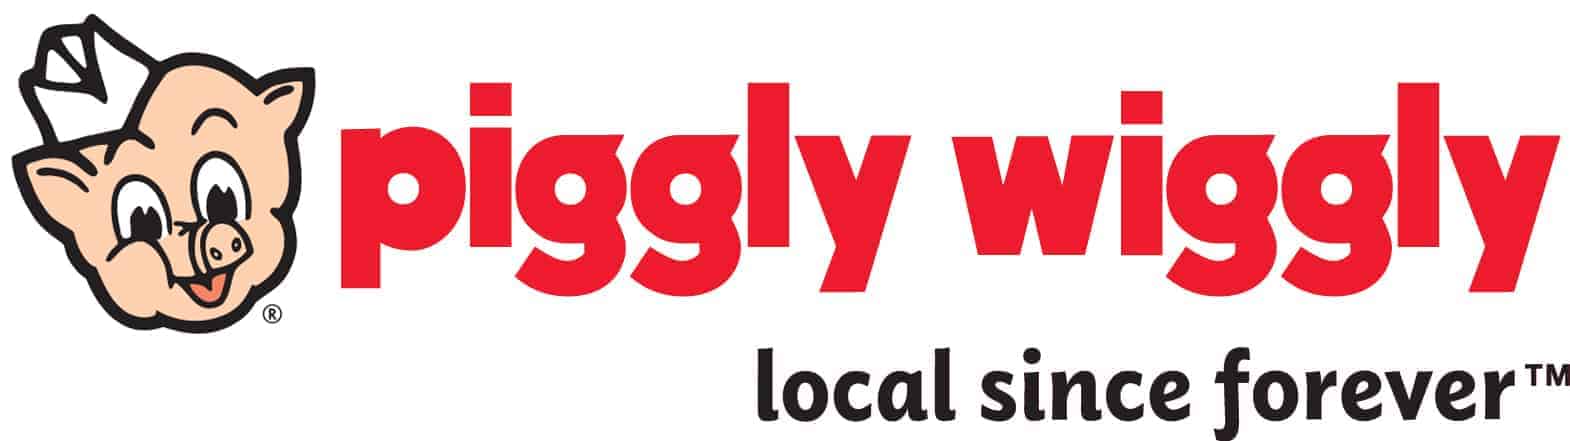 Piggly Wiggly South